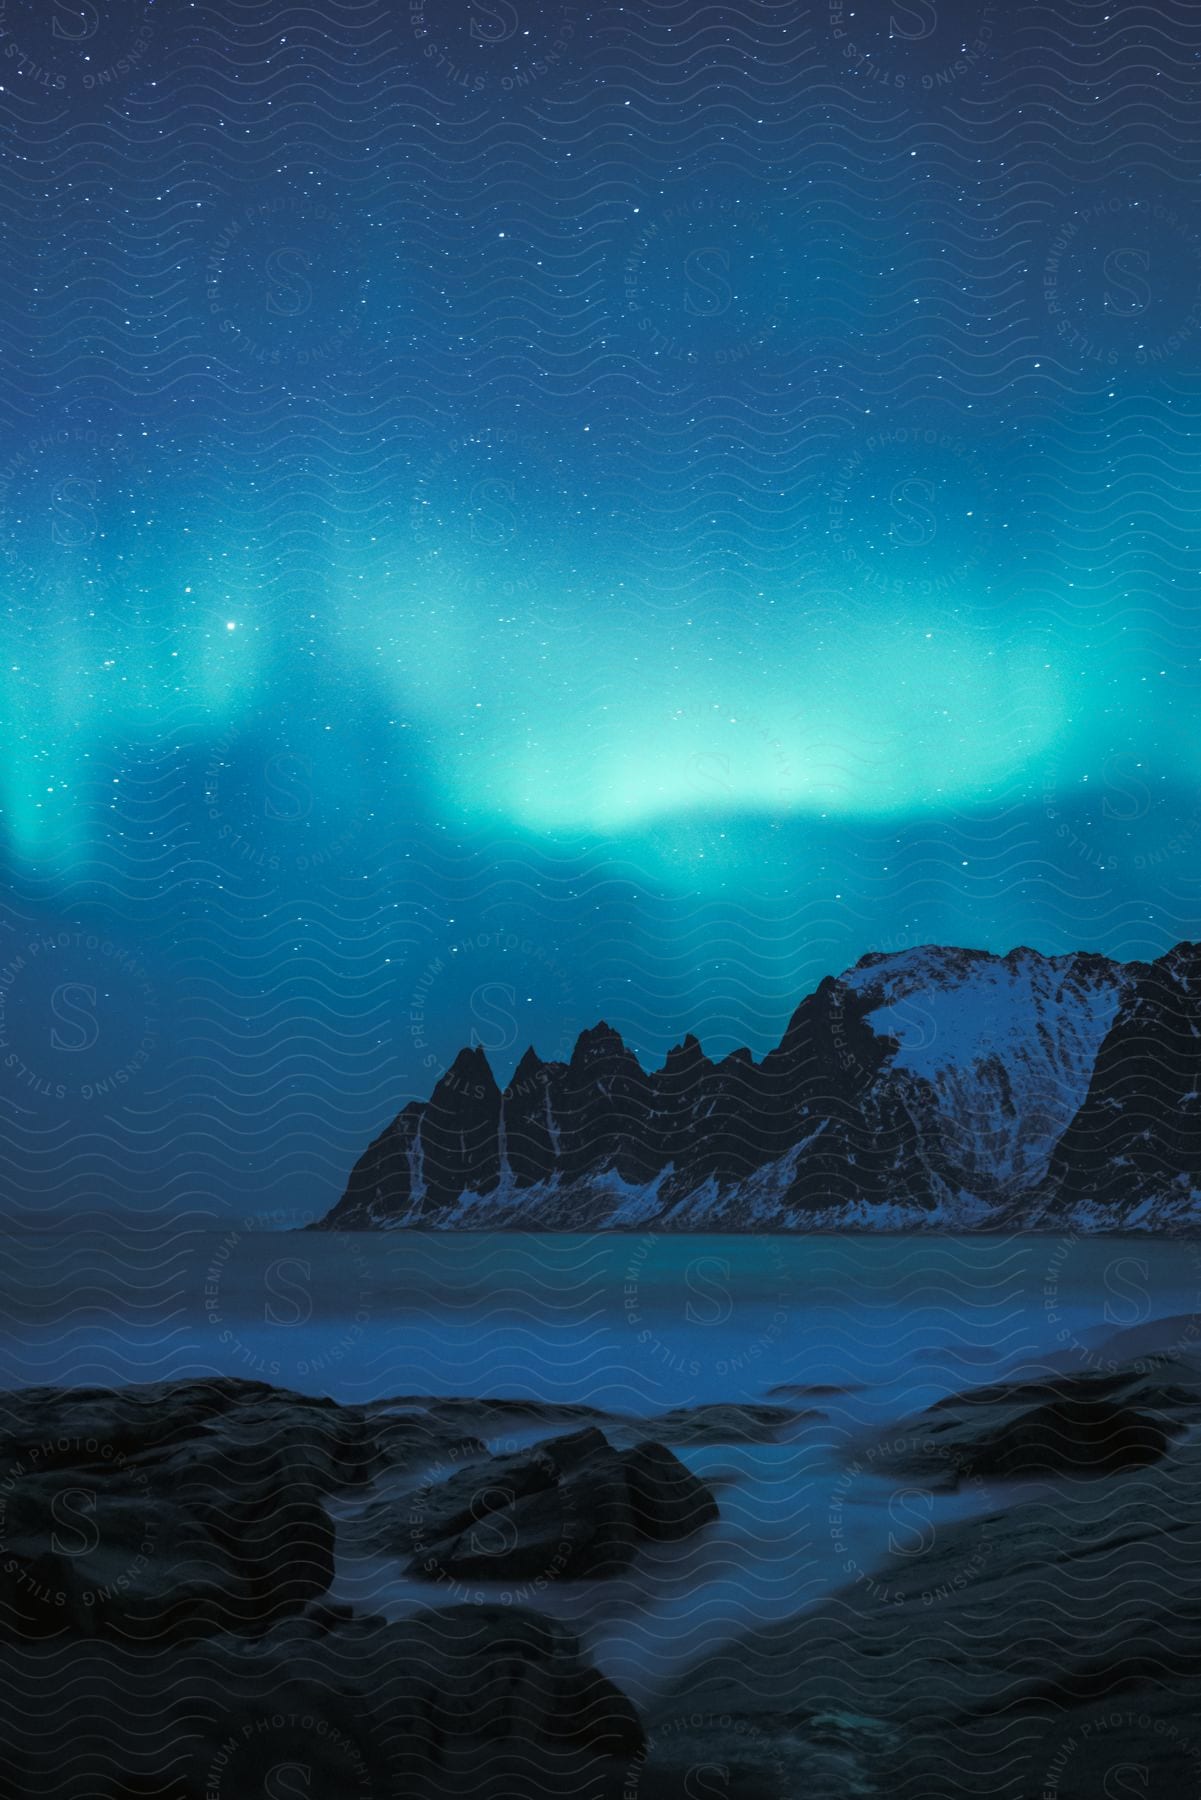 Aurora borealis glows above snowcovered mountains and a frozen lake in a starry night sky